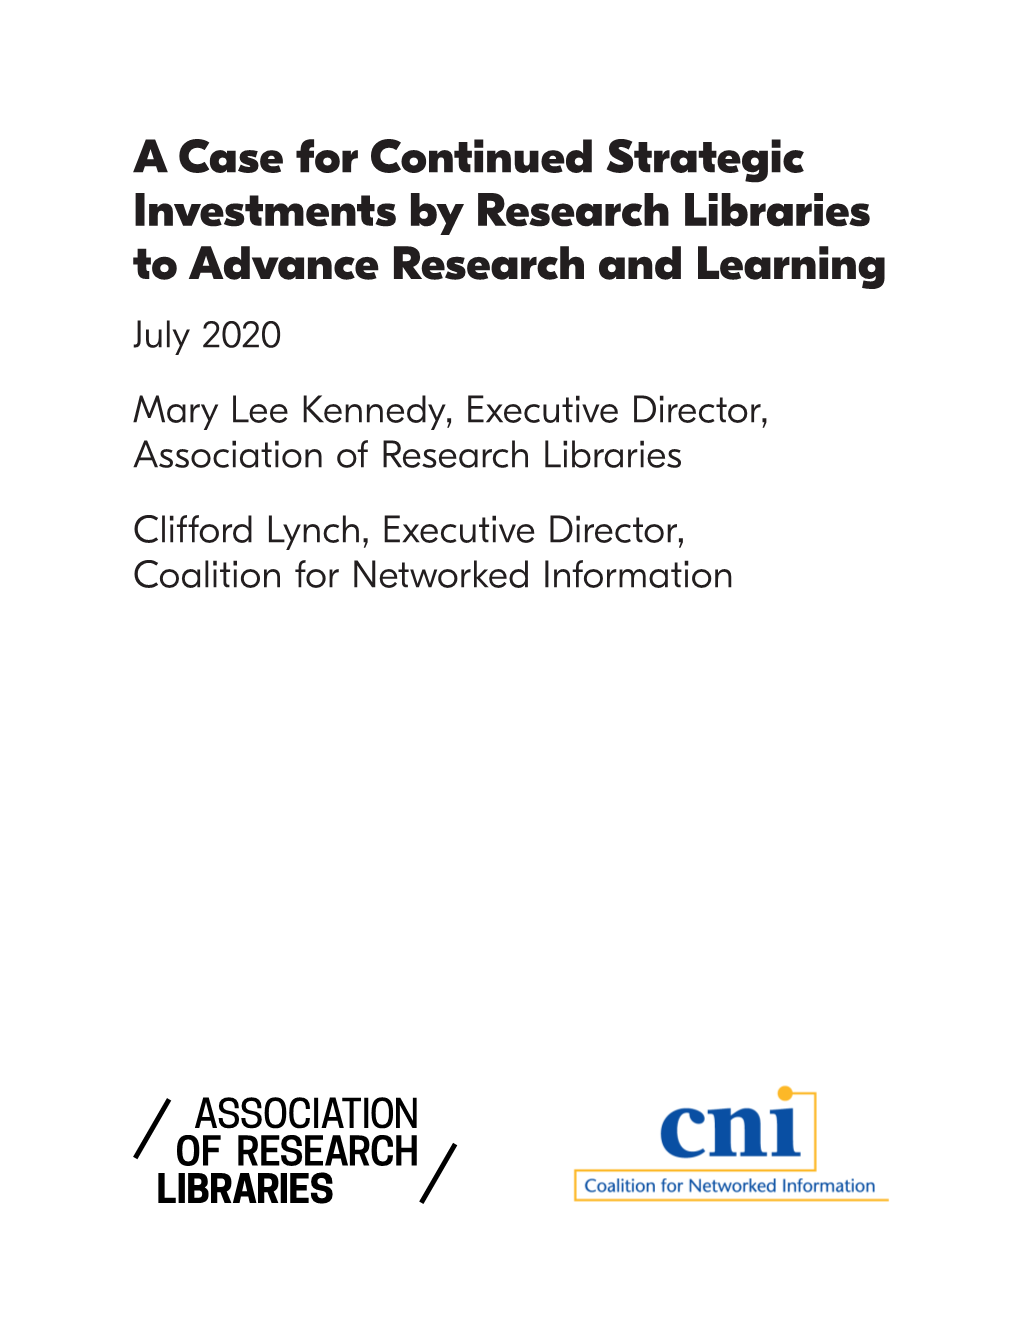 A Case for Continued Strategic Investments by Research Libraries